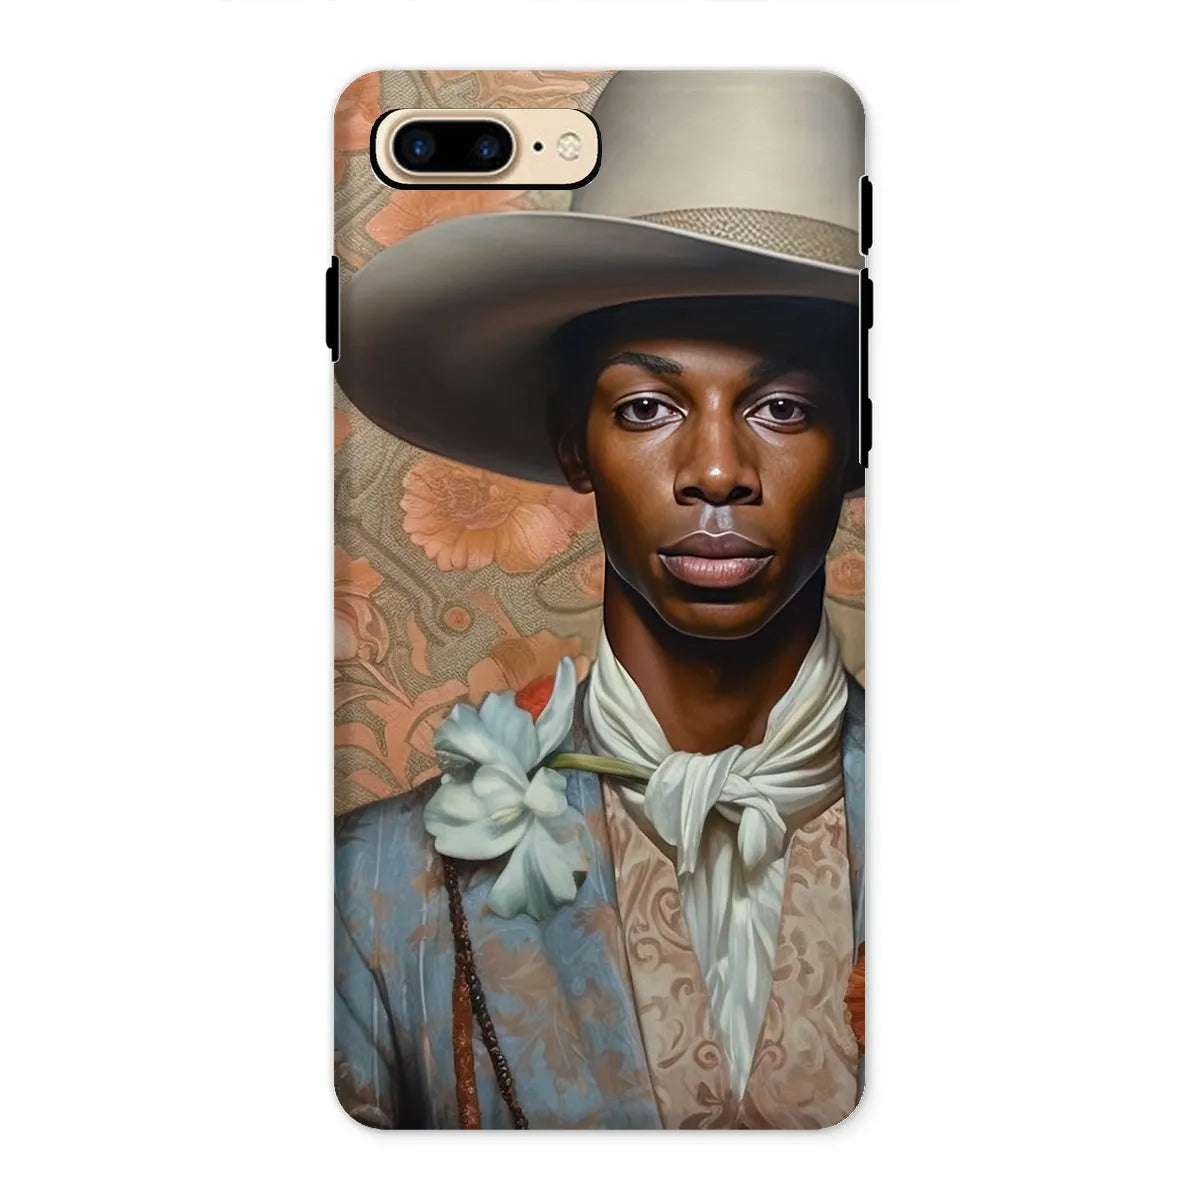 Apollo The Gay Cowboy - Gay Aesthetic Art Phone Case - Iphone 8 Plus / Matte - Mobile Phone Cases - Aesthetic Art